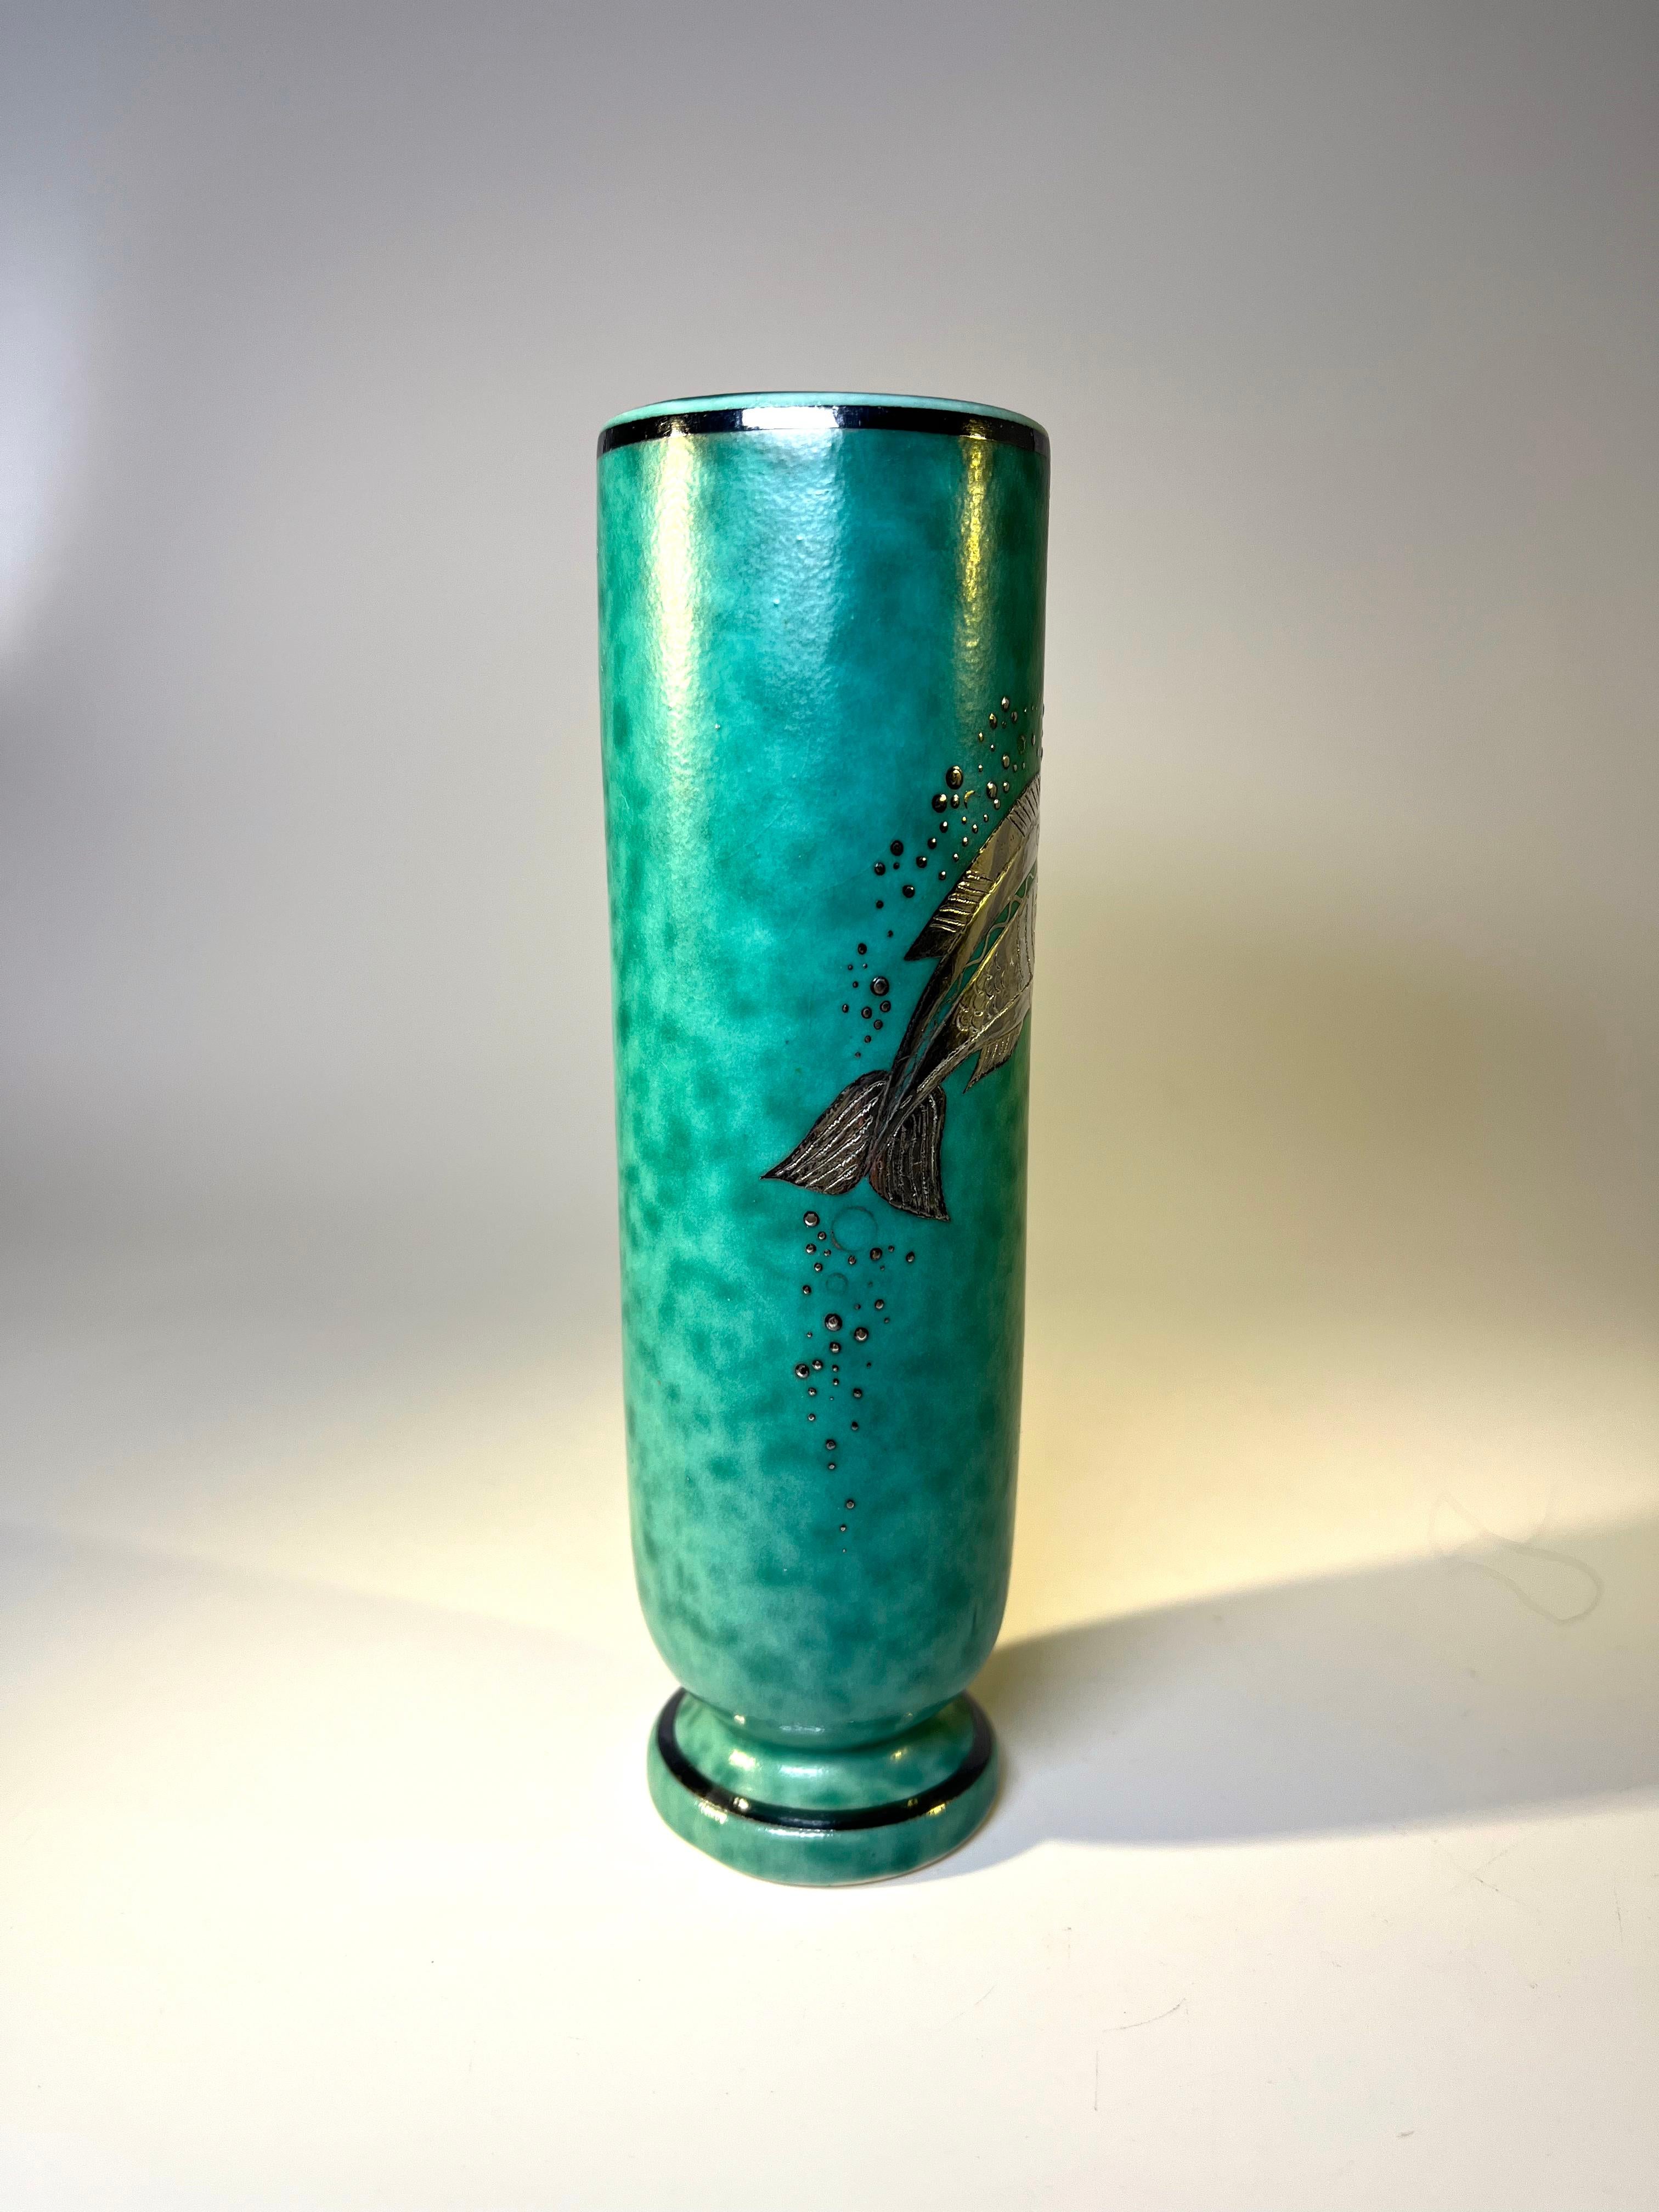 Piscine Stoneware Vase Applied Silver, Wilhelm Kage, Argenta, Gustavsberg #1029 In Excellent Condition For Sale In Rothley, Leicestershire